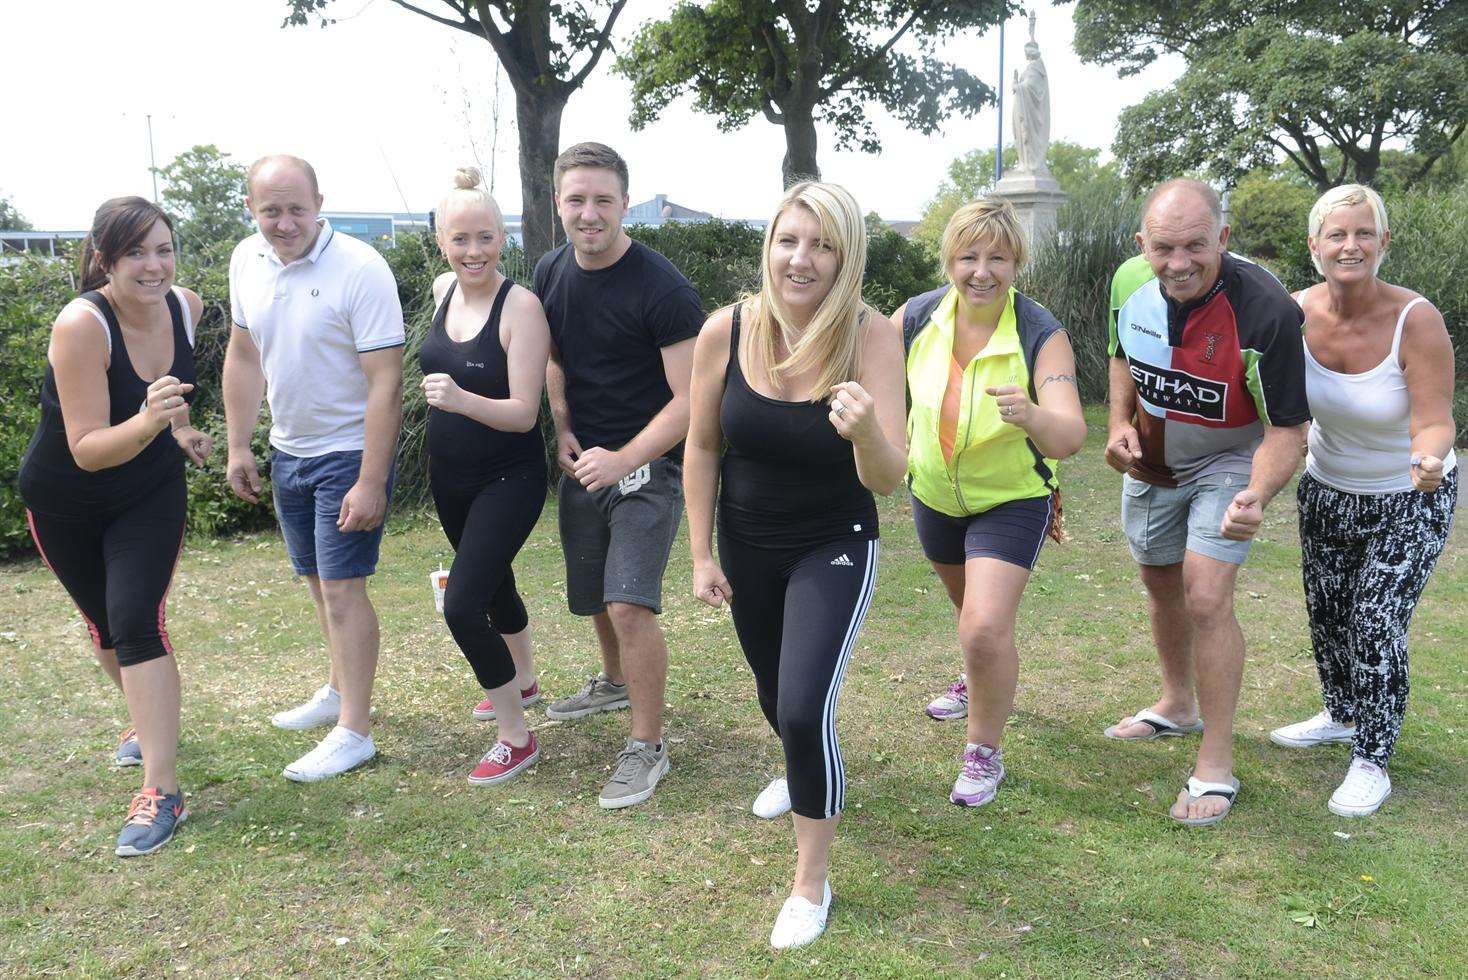 Carla Goodwin with family and friends who are doing a charity run in aid of Asthma UK in memory of her son Joshua